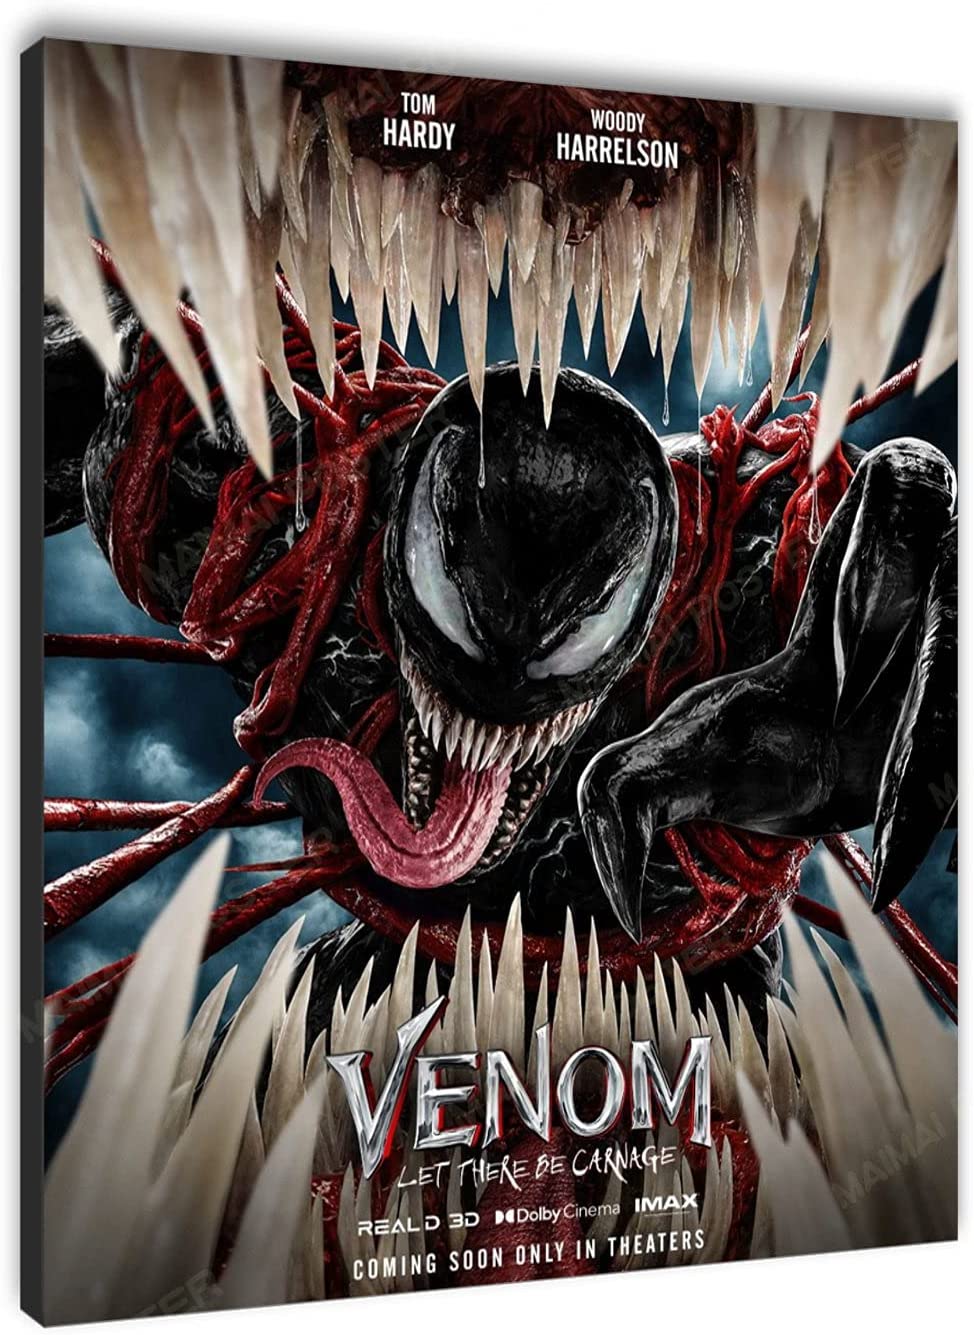 Buy Venom 2, Let There Be Carnage Poster Woody Harrelson Carnage Battle Tom Hardy Poster Movie Official Poster Collection Photo HD Canvas Painting Wall Art Decoration SANTA RONA Xirokey 32x40in No